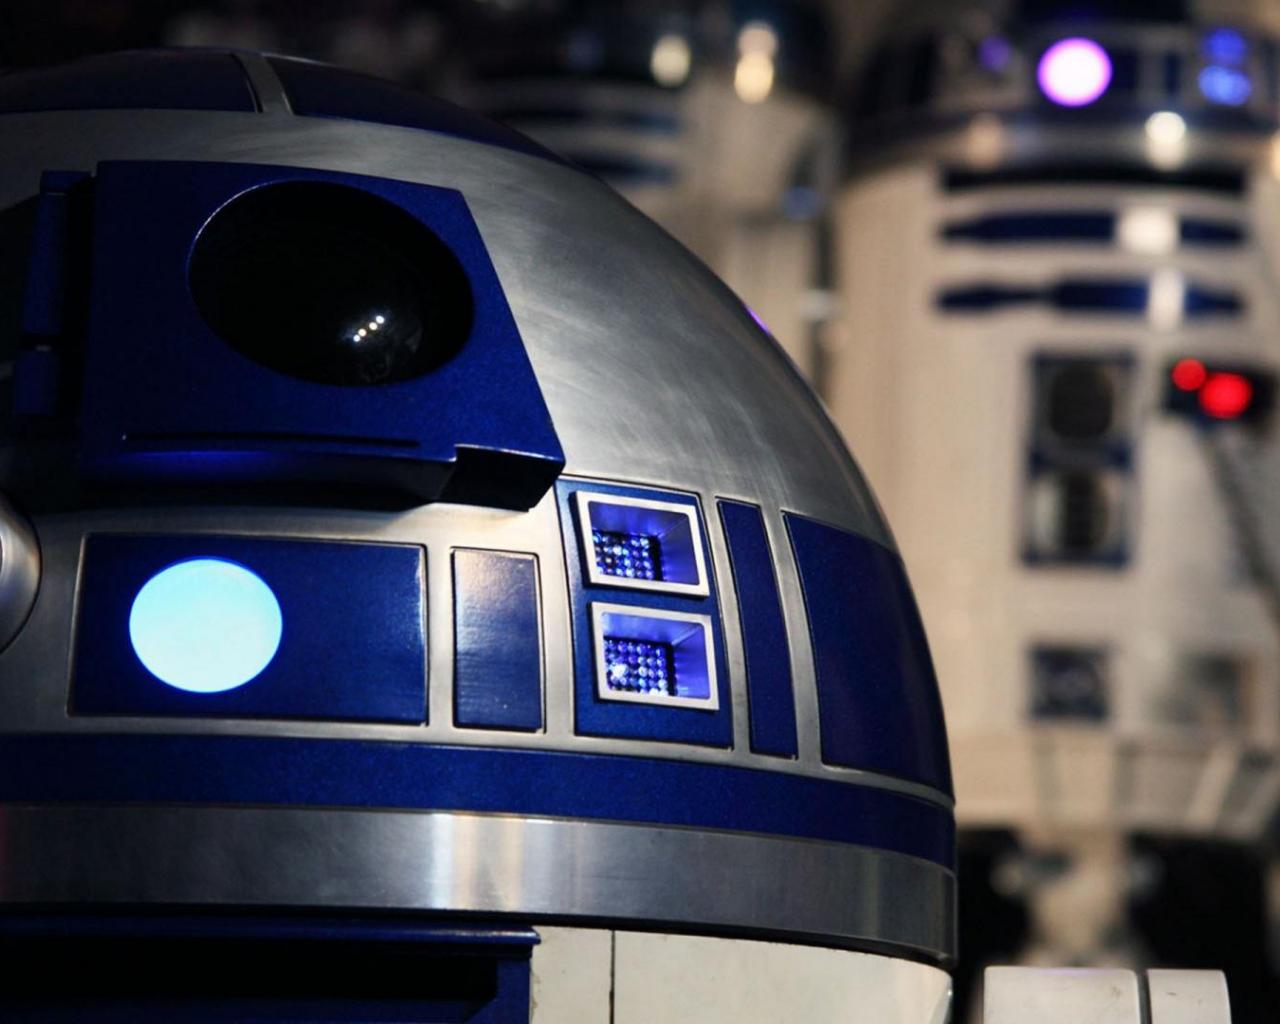 R2d2 Wallpaper High Quality And Resolution On